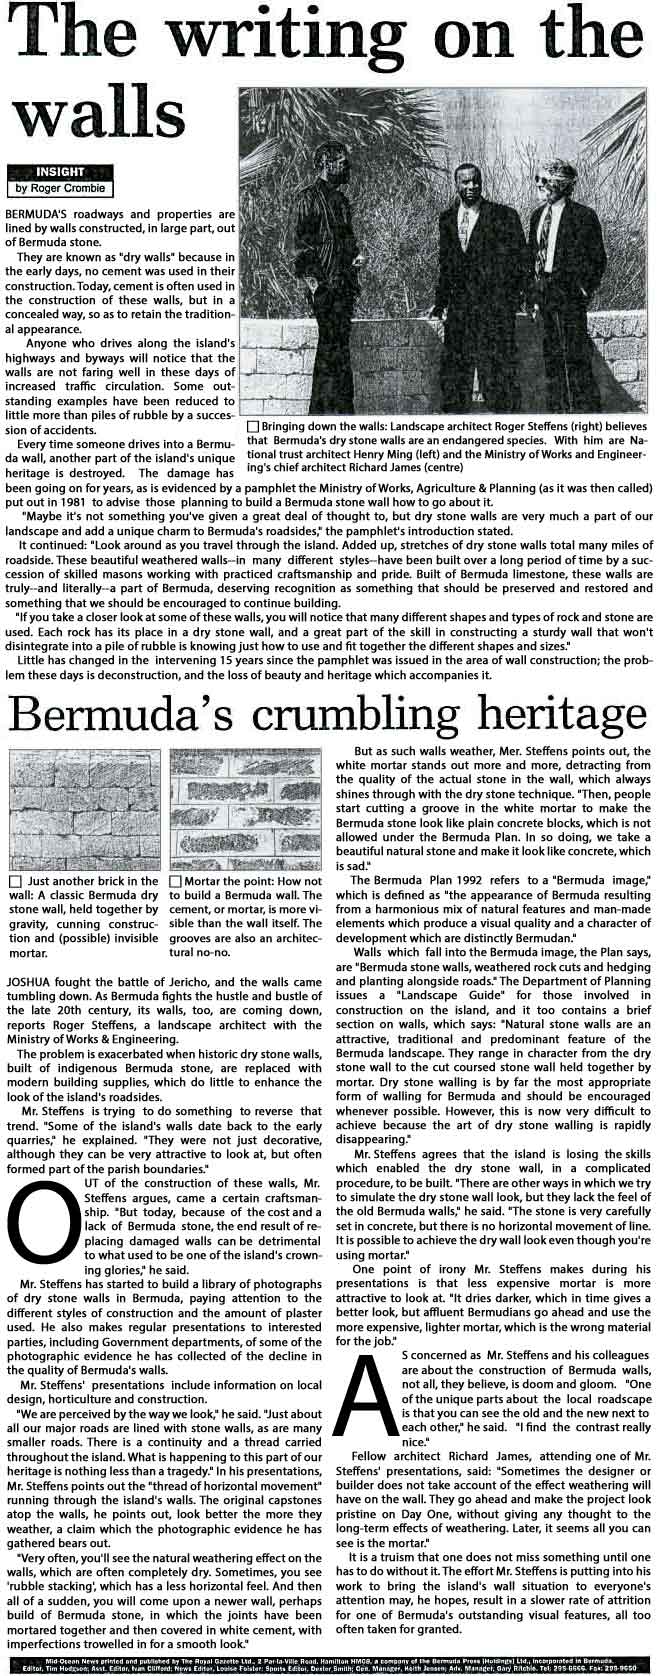 Roger Steffens in Bermuda discusses the "dry walls"